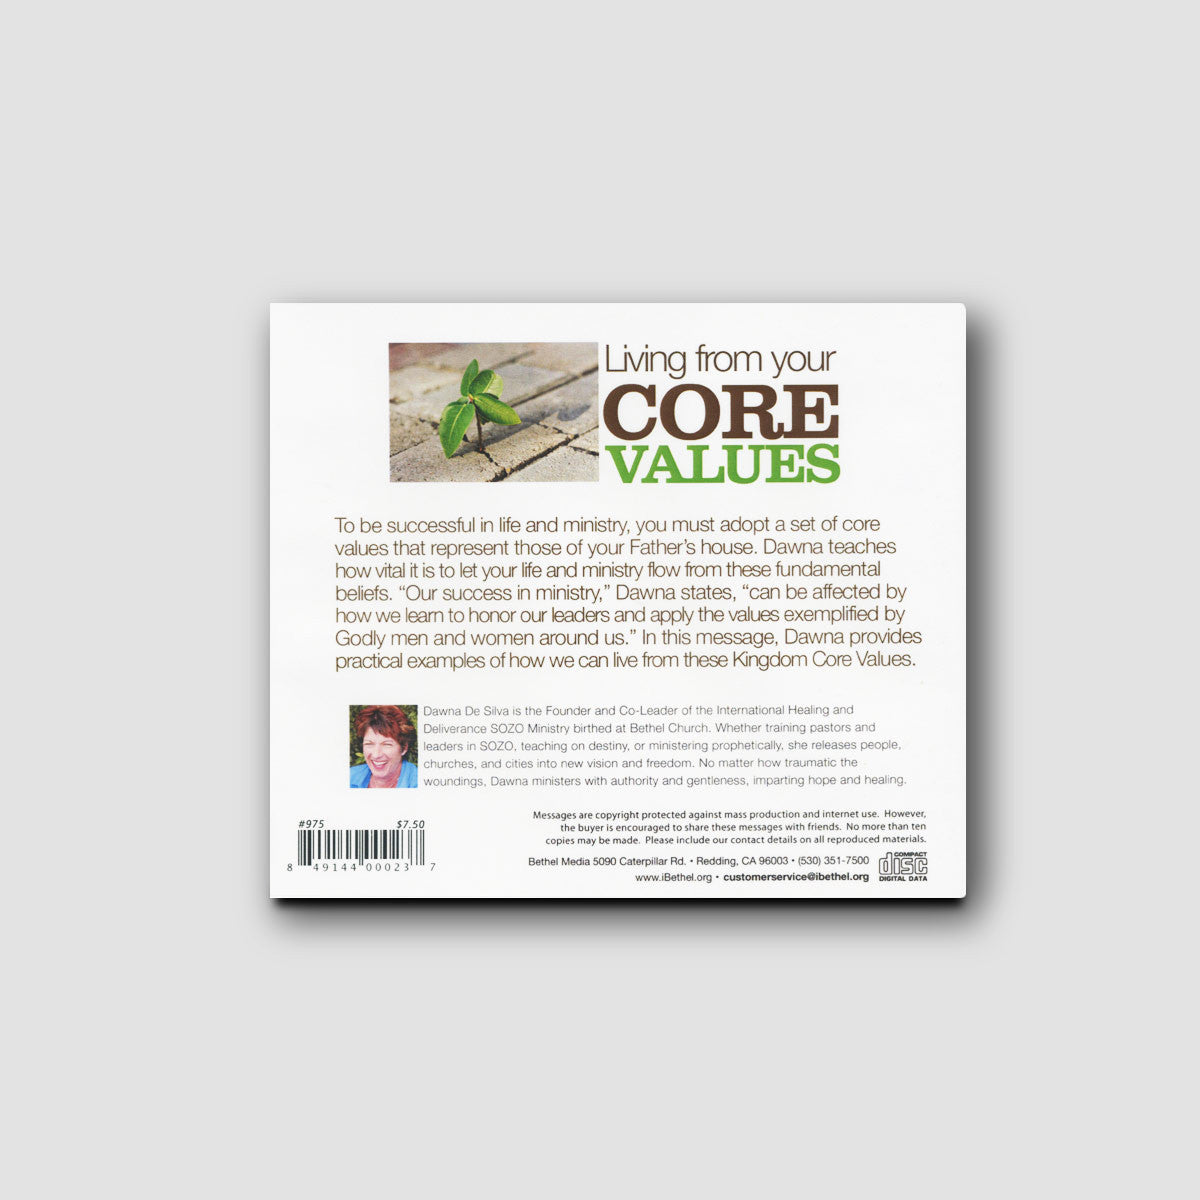 Living from your Core Values